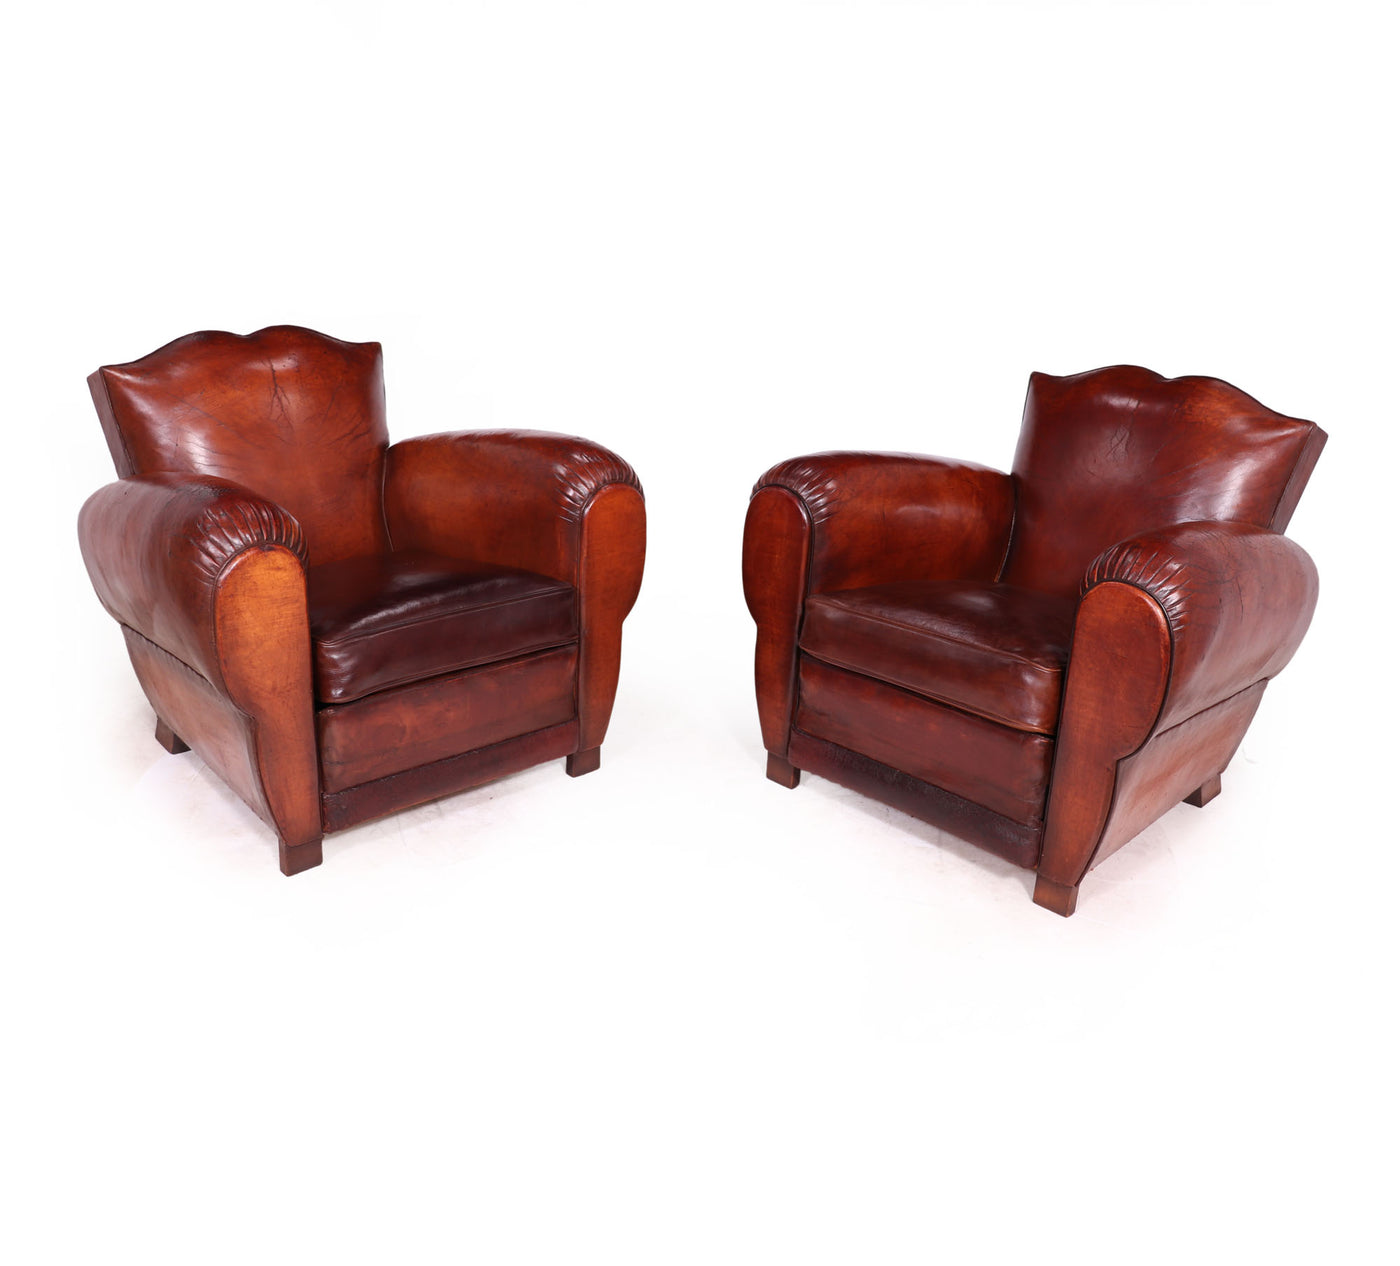 Pair of French Leather Moustache Back Club Chairs front